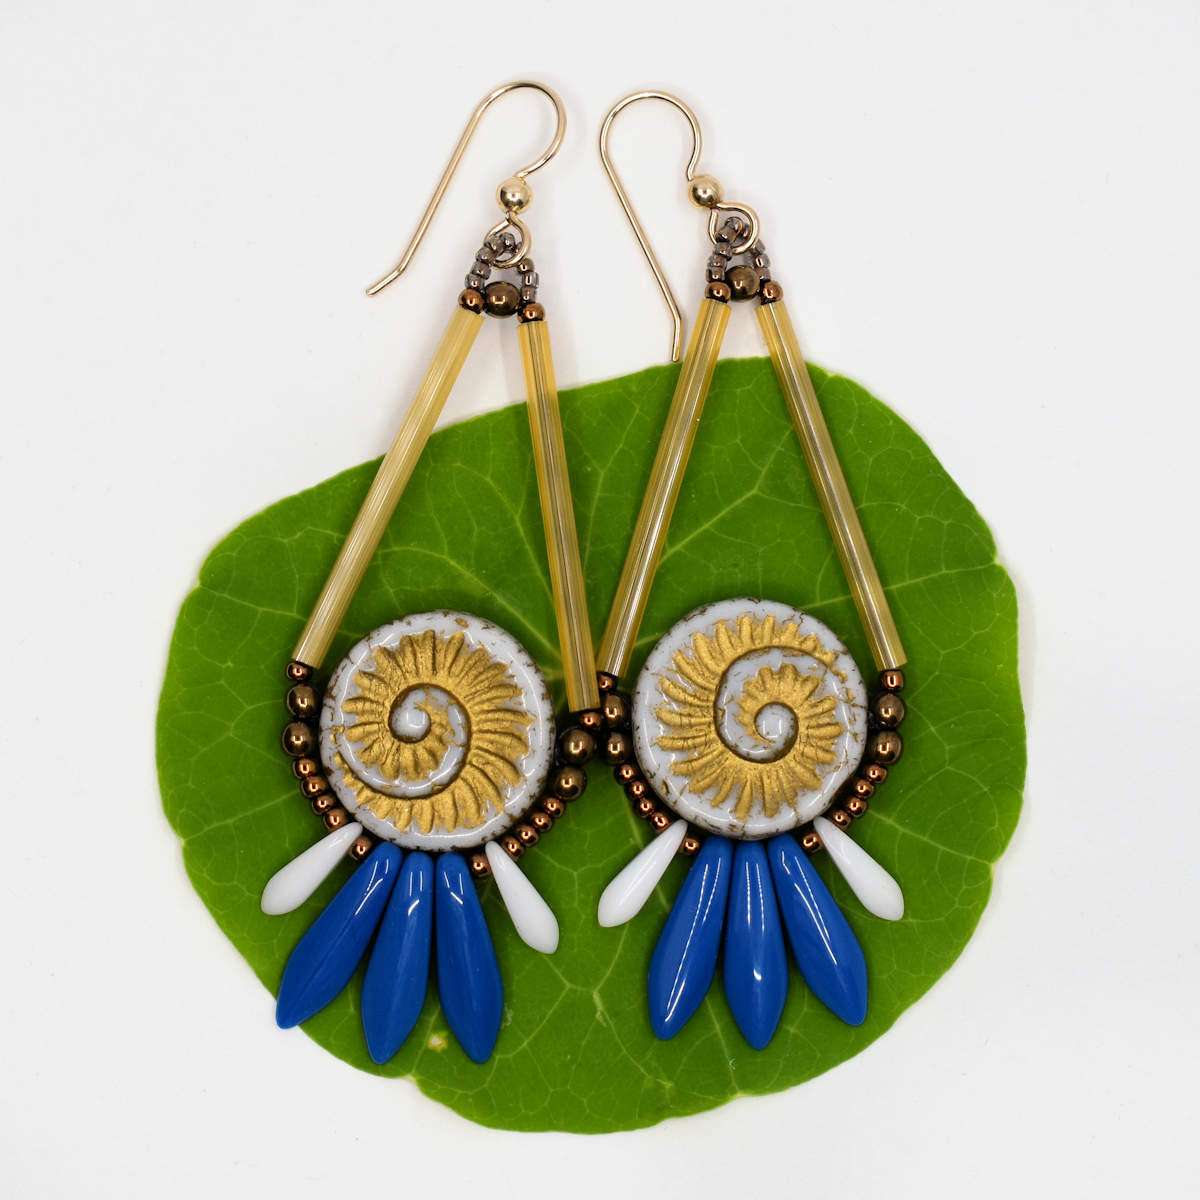 A pair of gold and blue earrings with white spiral shell beads in their centers lay on a circular green leaf and white background. The earrings have gold wires and are formed by two long gold beads on the upper sides, holding white shell impression beads that have gold embossing. At the bottom is a fan of three medium blue dagger beads sandwiched between smaller white daggers.